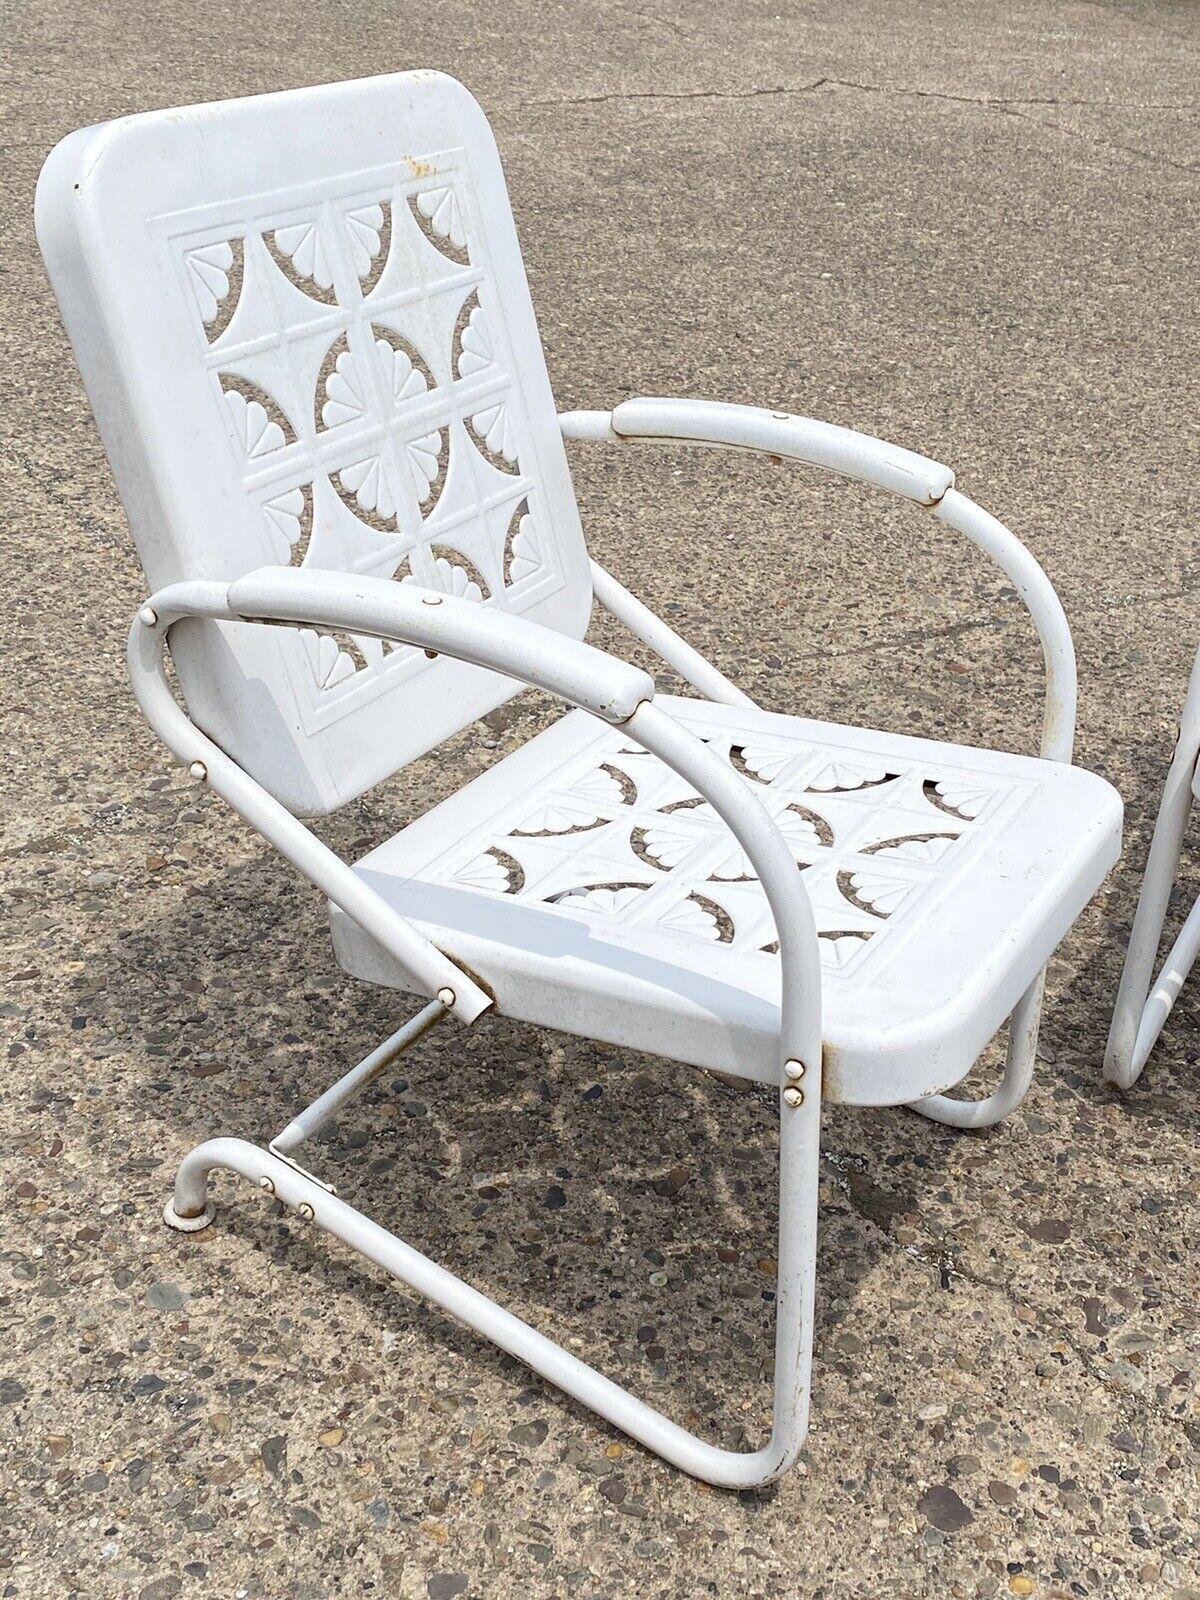 Vintage Starburst Pie Crest Metal Outdoor Patio Springer Lounge Chairs - a Pair For Sale 5